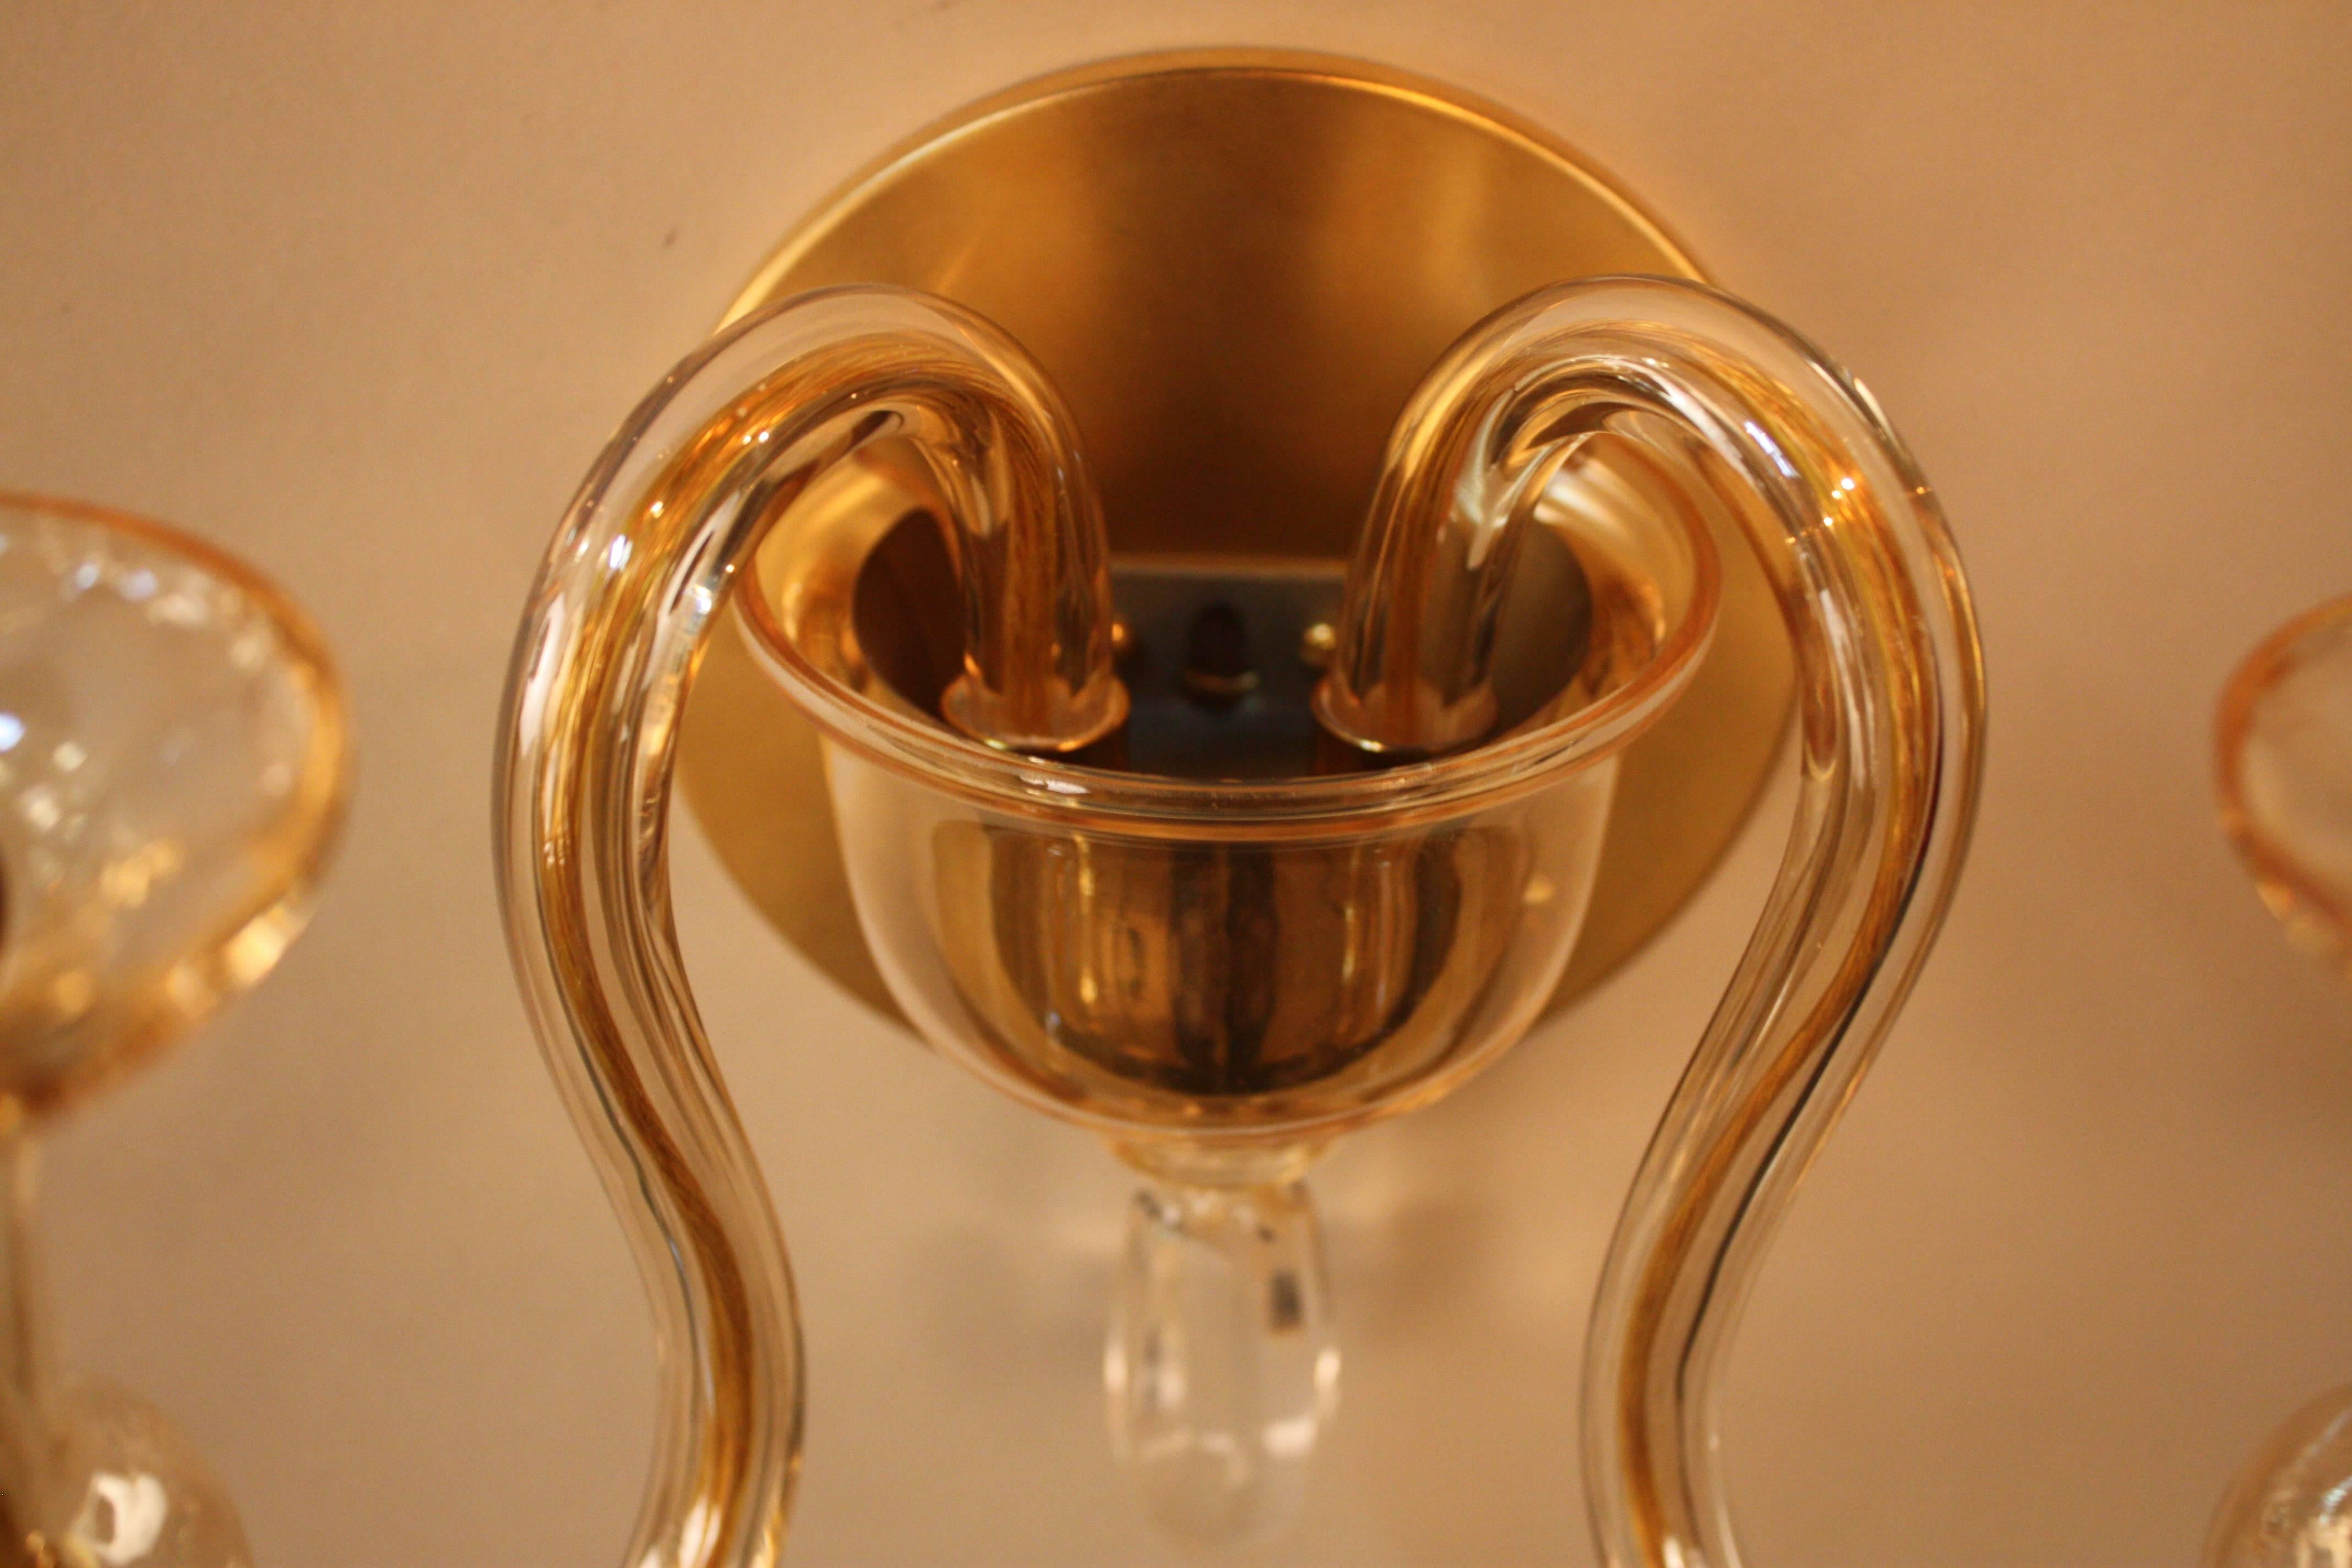 Set of Three 1970s German Crystal Wall Sconces In Good Condition For Sale In Fairfax, VA